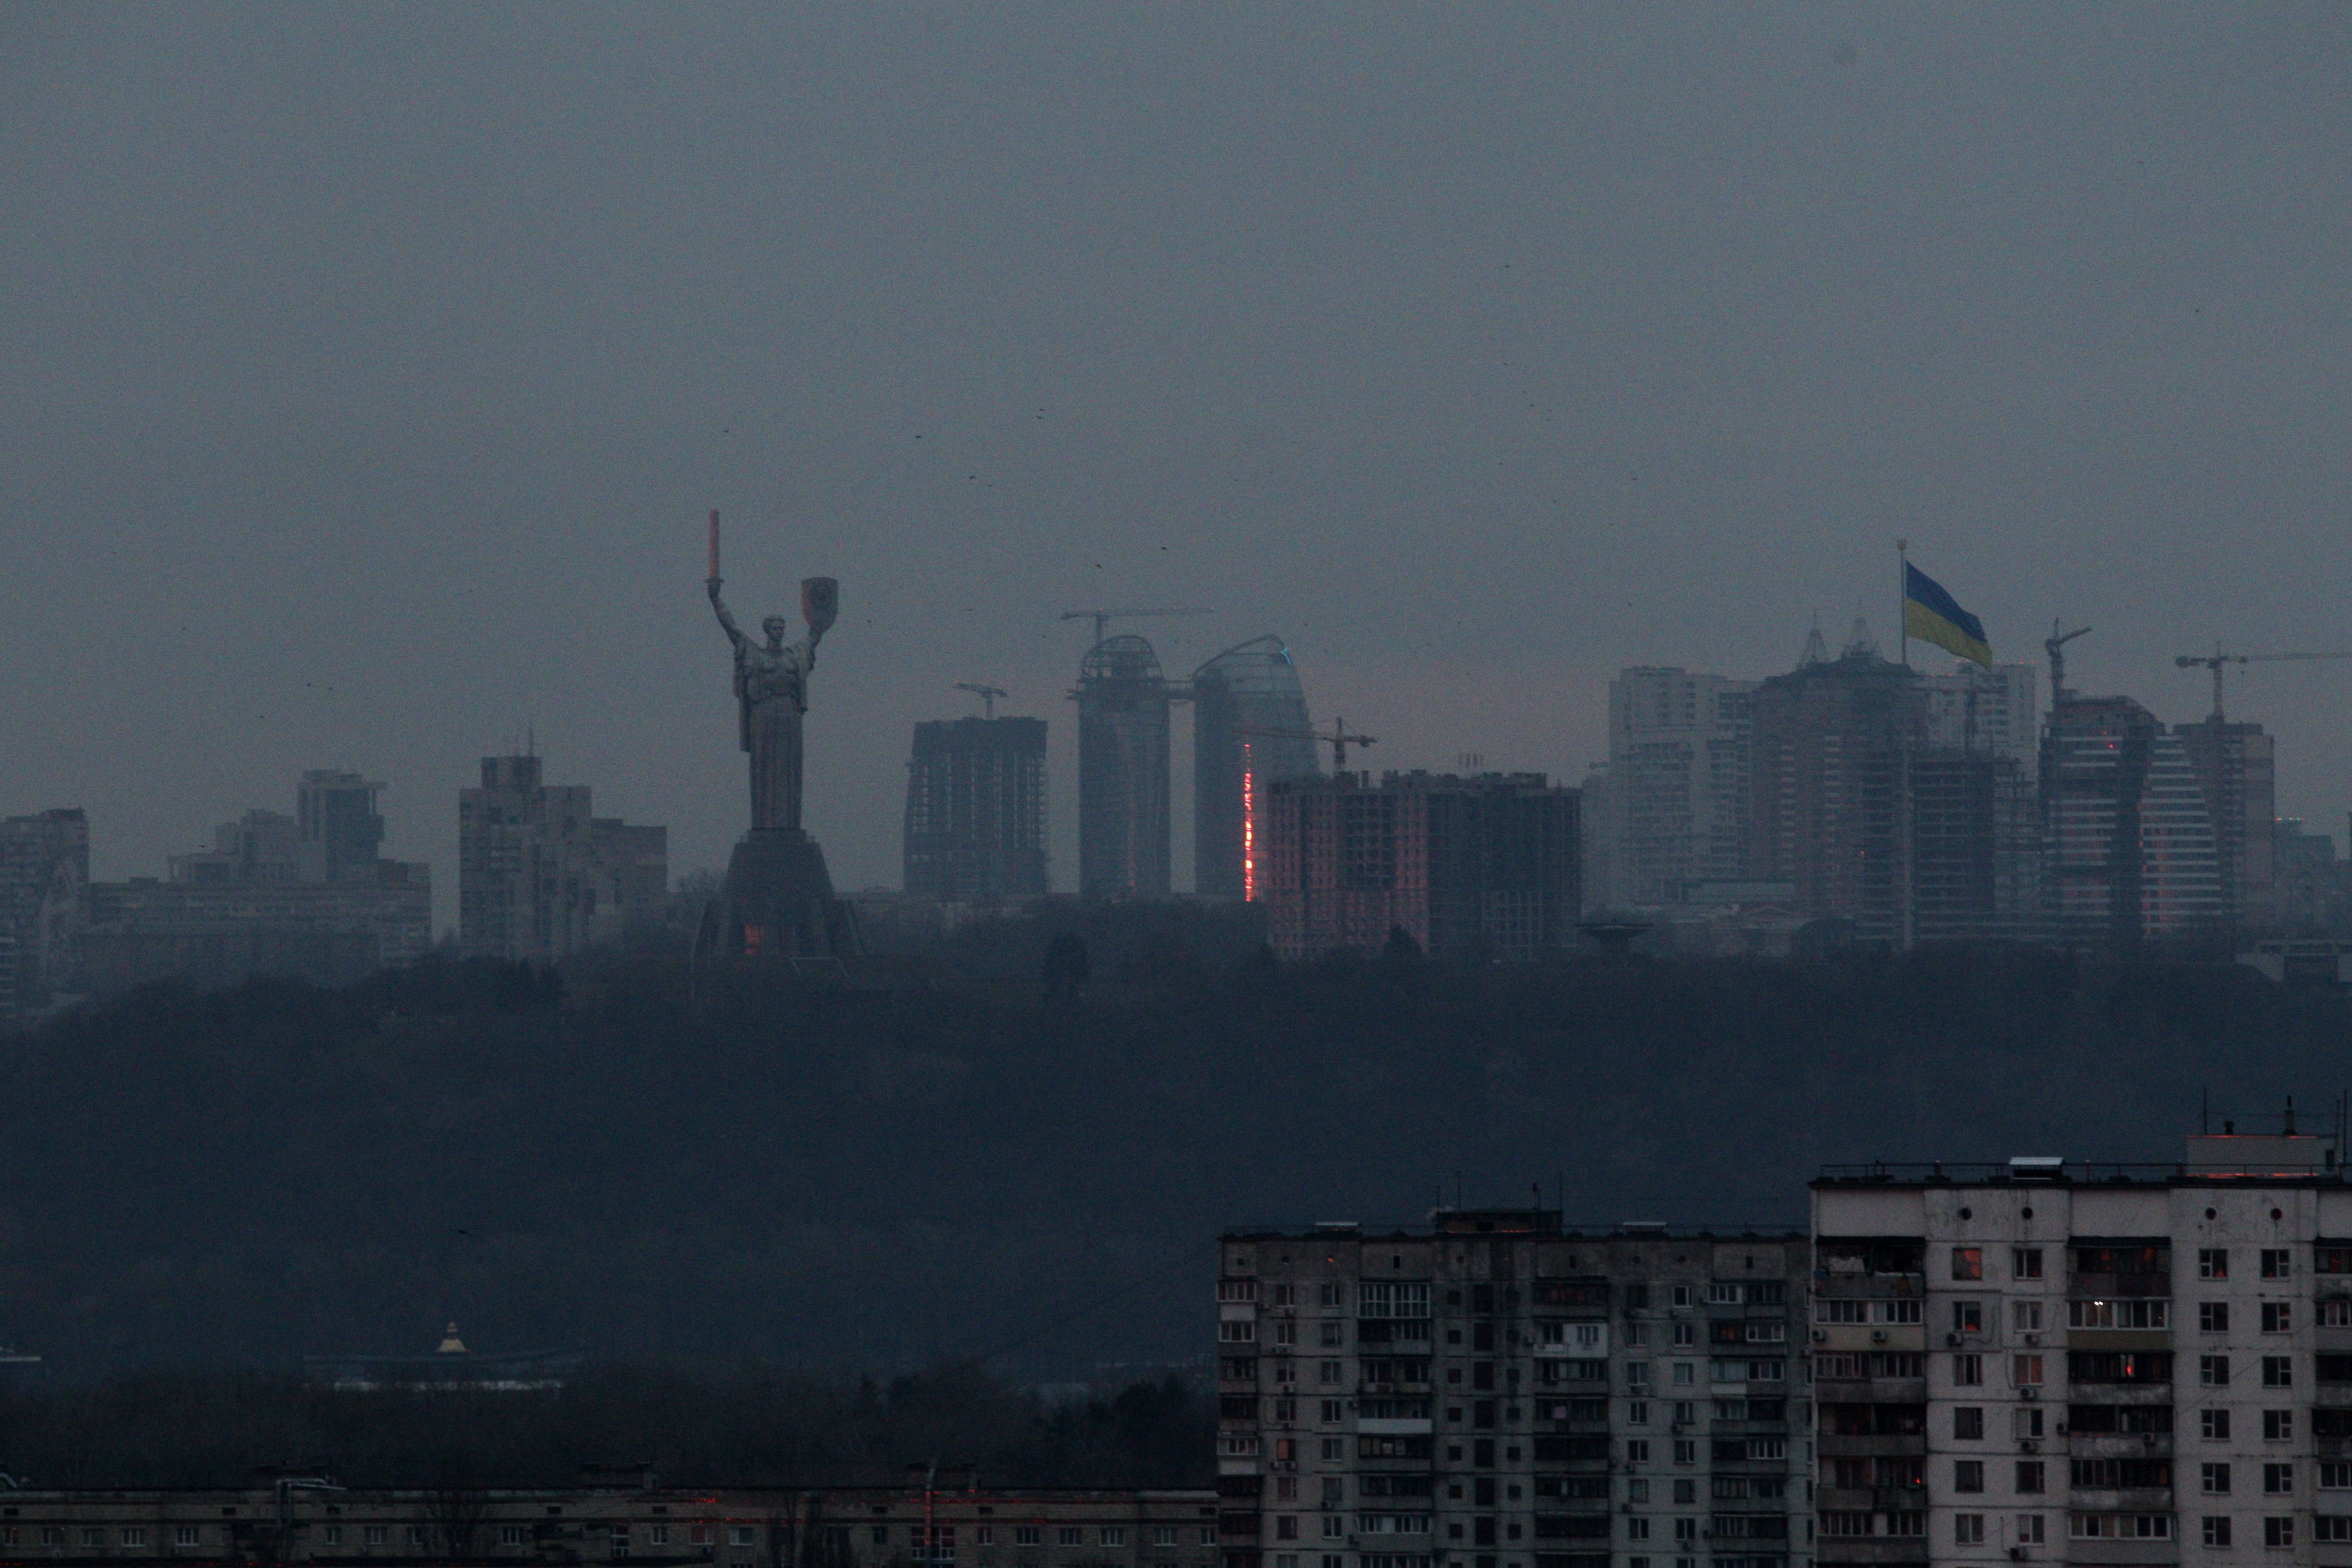 Morning in Kyiv on February 25, 2022